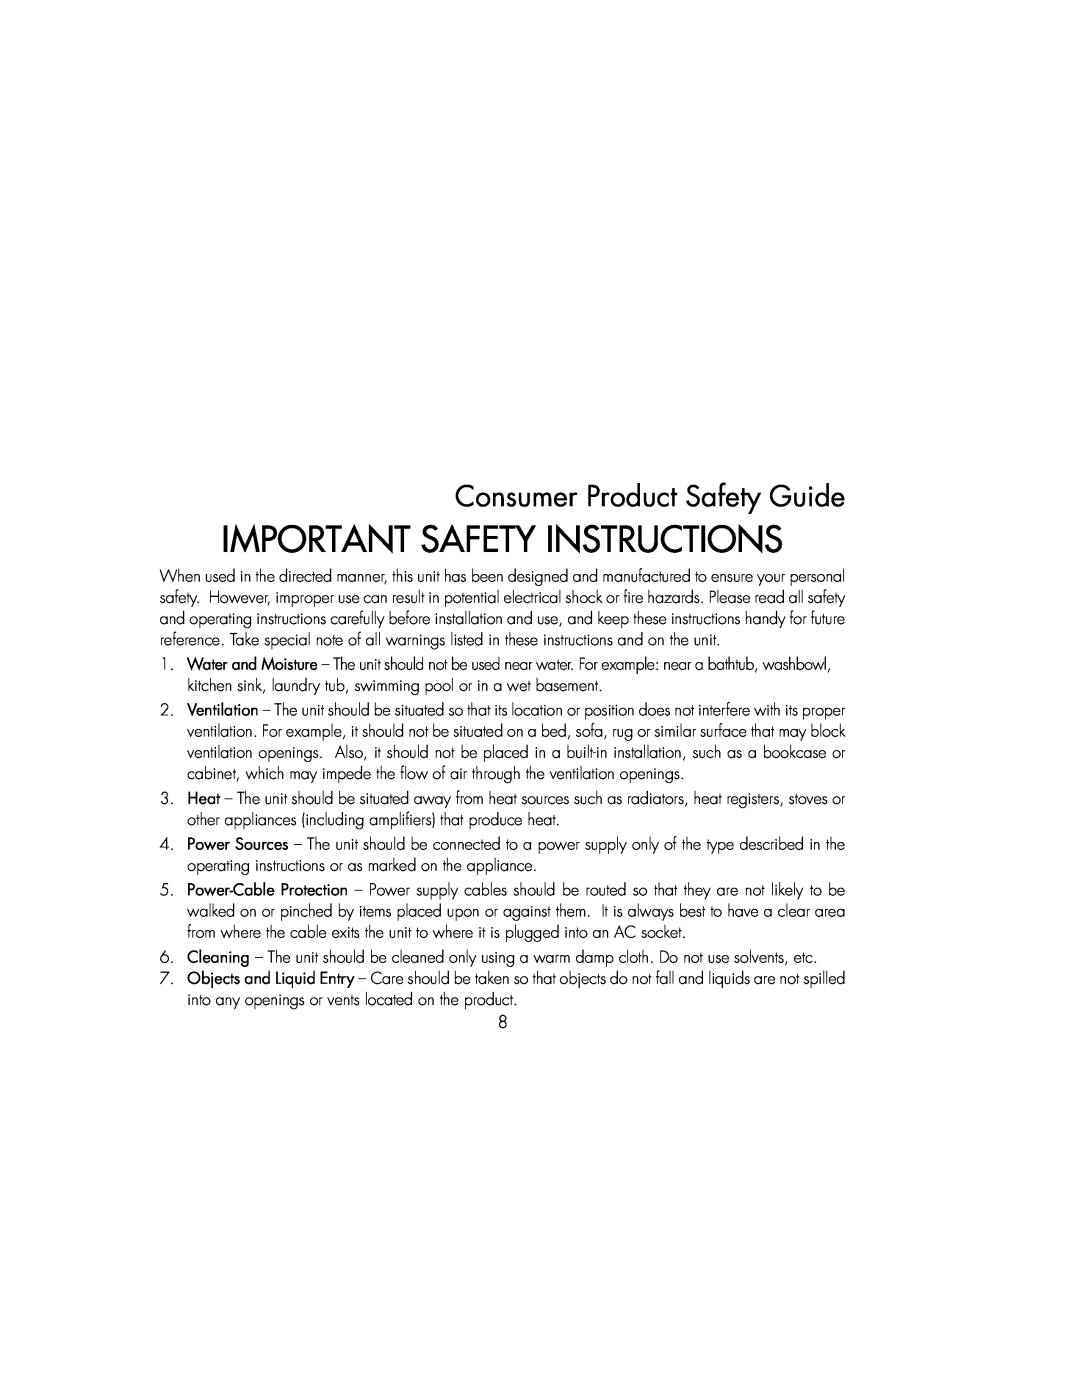 iHome IBT25BC instruction manual Consumer Product Safety Guide, Important Safety Instructions 